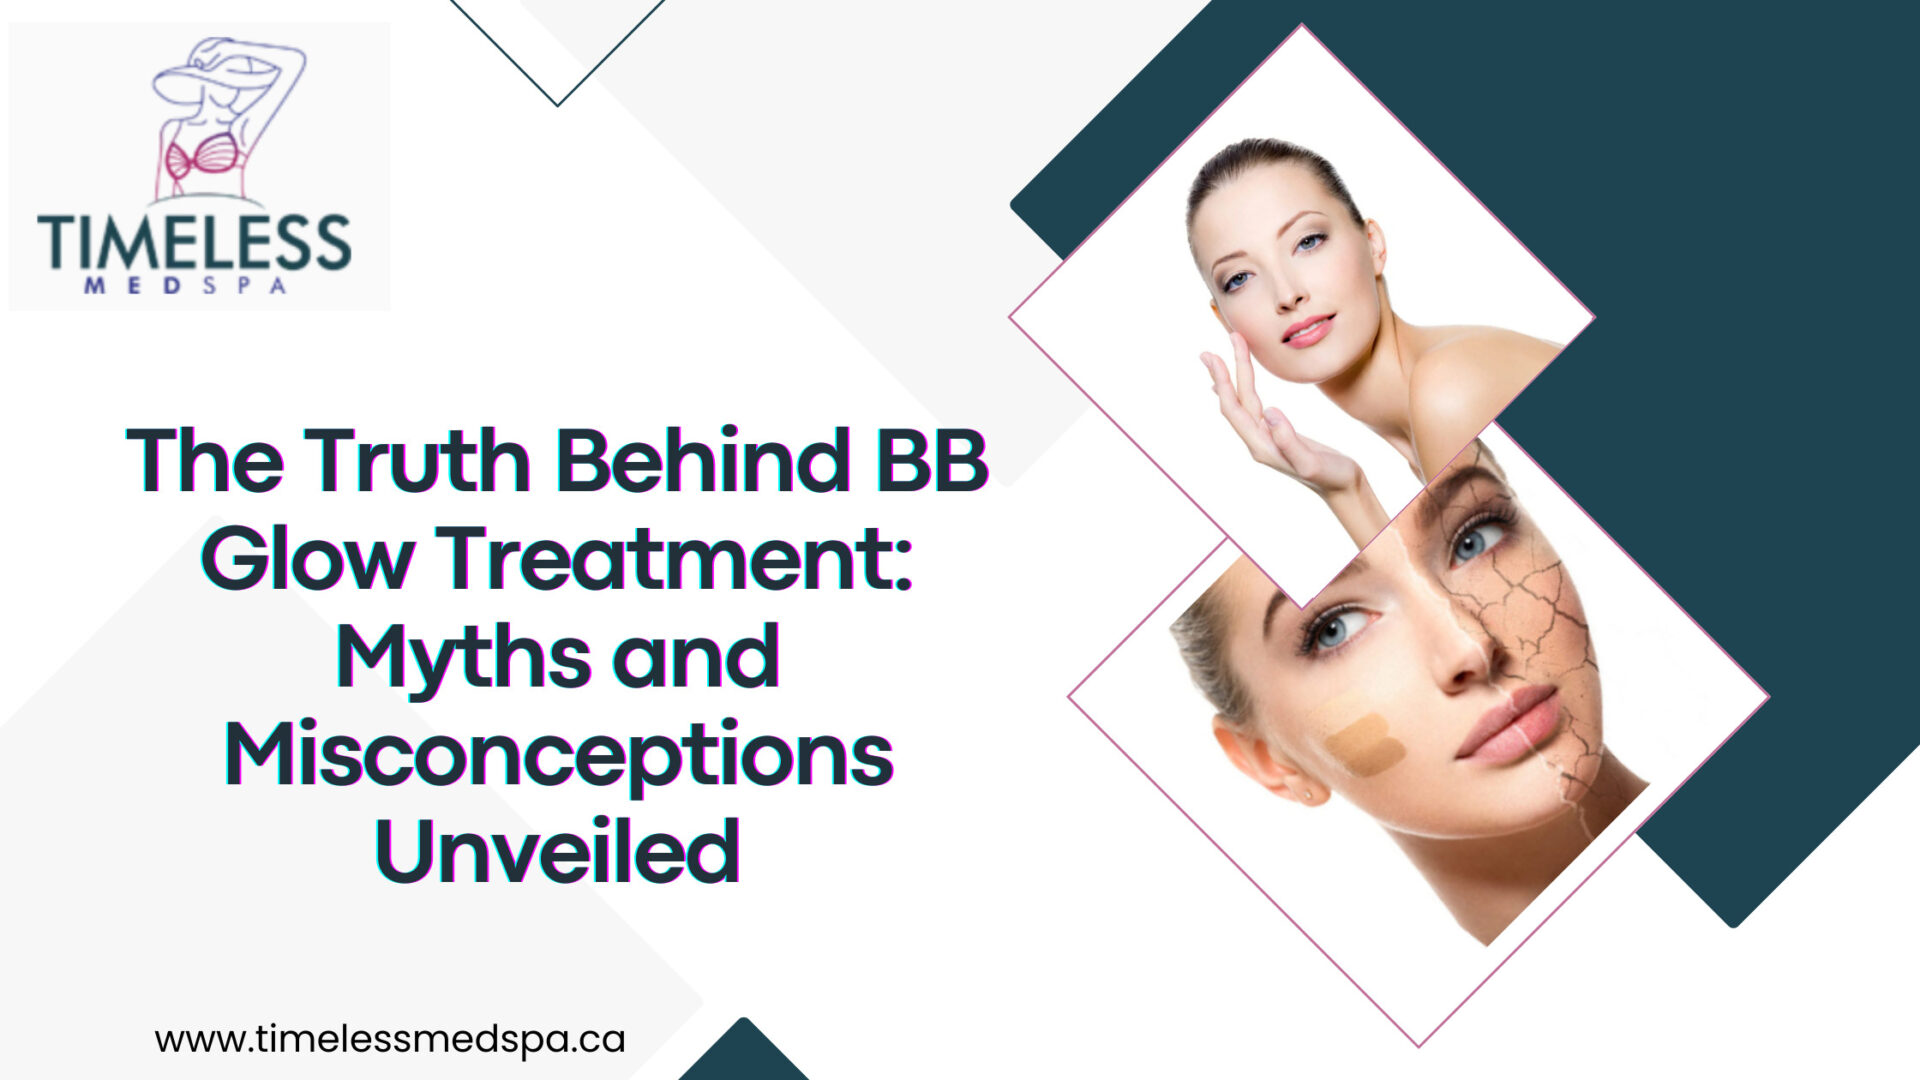 The Truth Behind BB Glow Treatment Myths and Misconceptions Unveiled